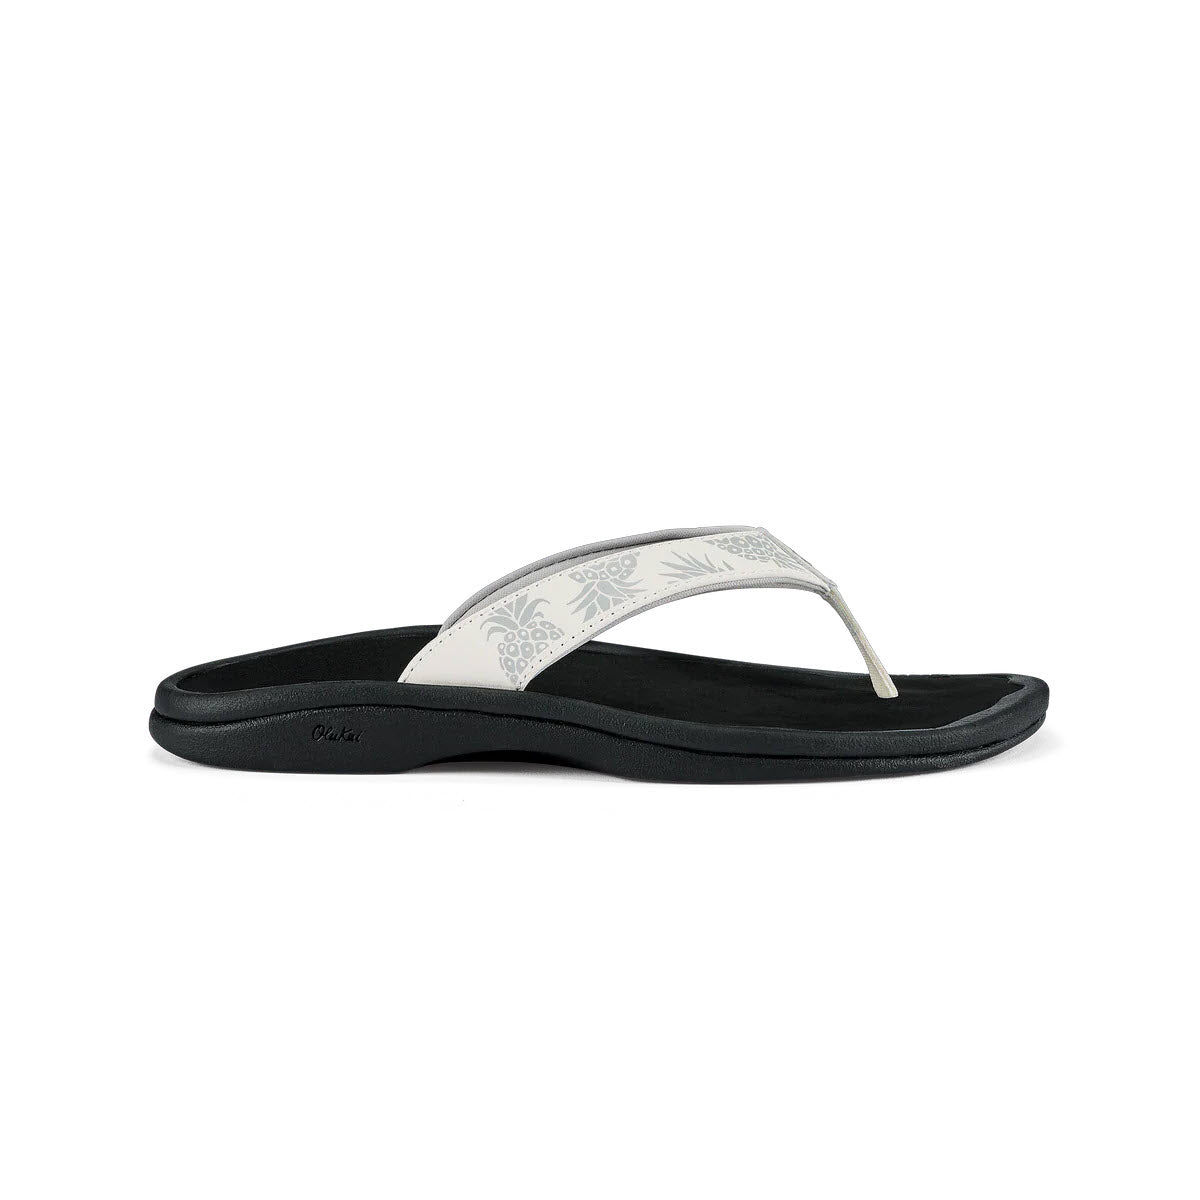 A single Olukai Ohana Bright White water-resistant flip-flop with a patterned strap on a white background.